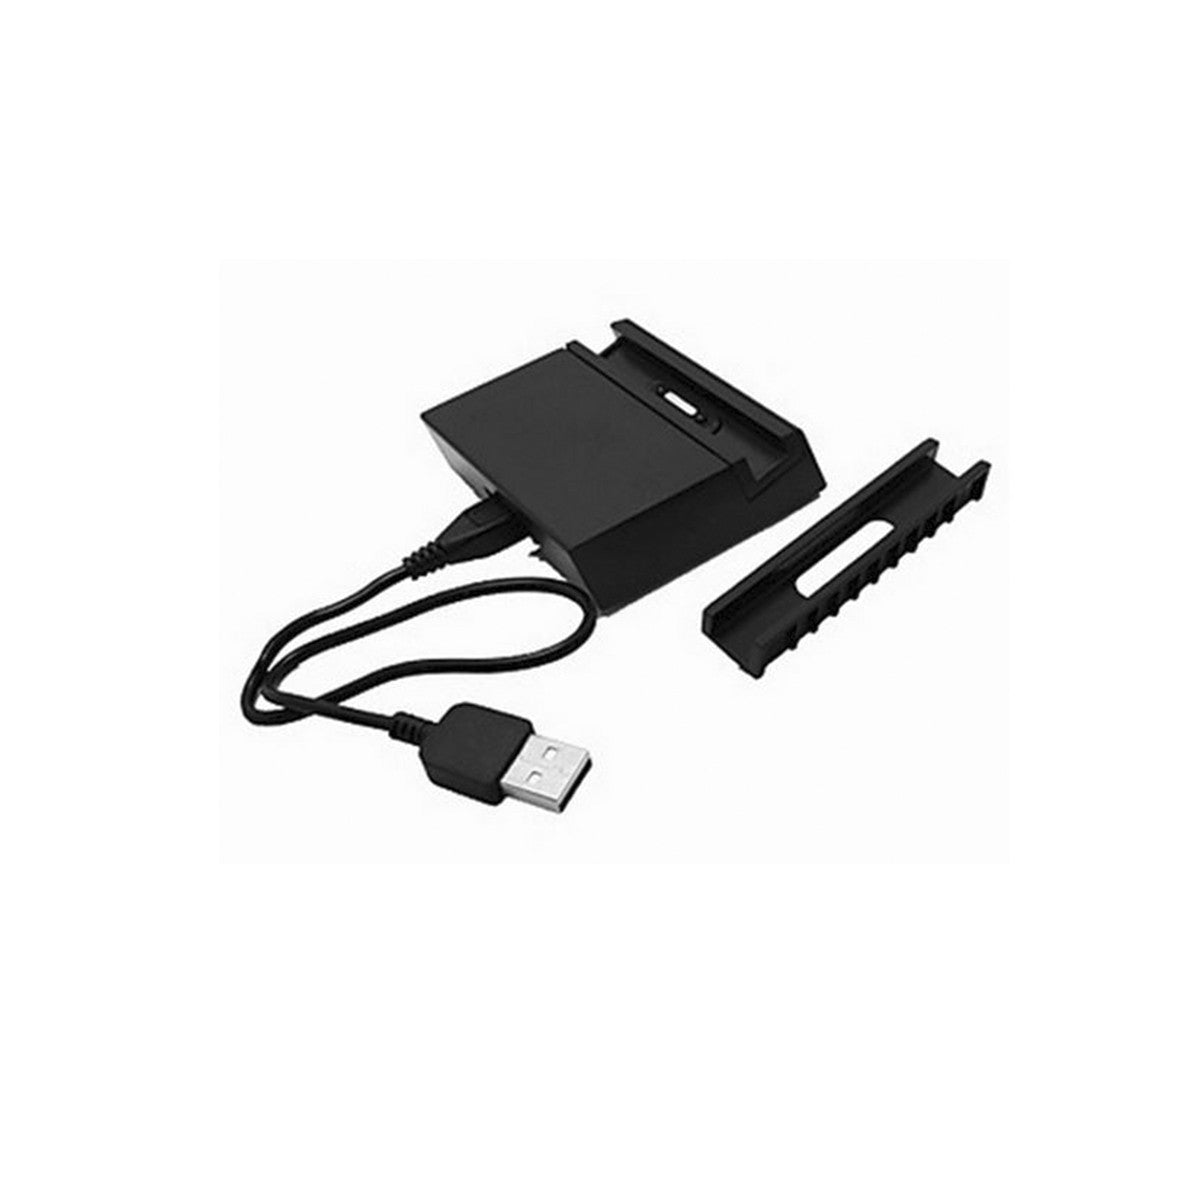 Magnetic USB Charging Dock For Sony Xperia Z1 Z2 Z3 ZUltra Compact   